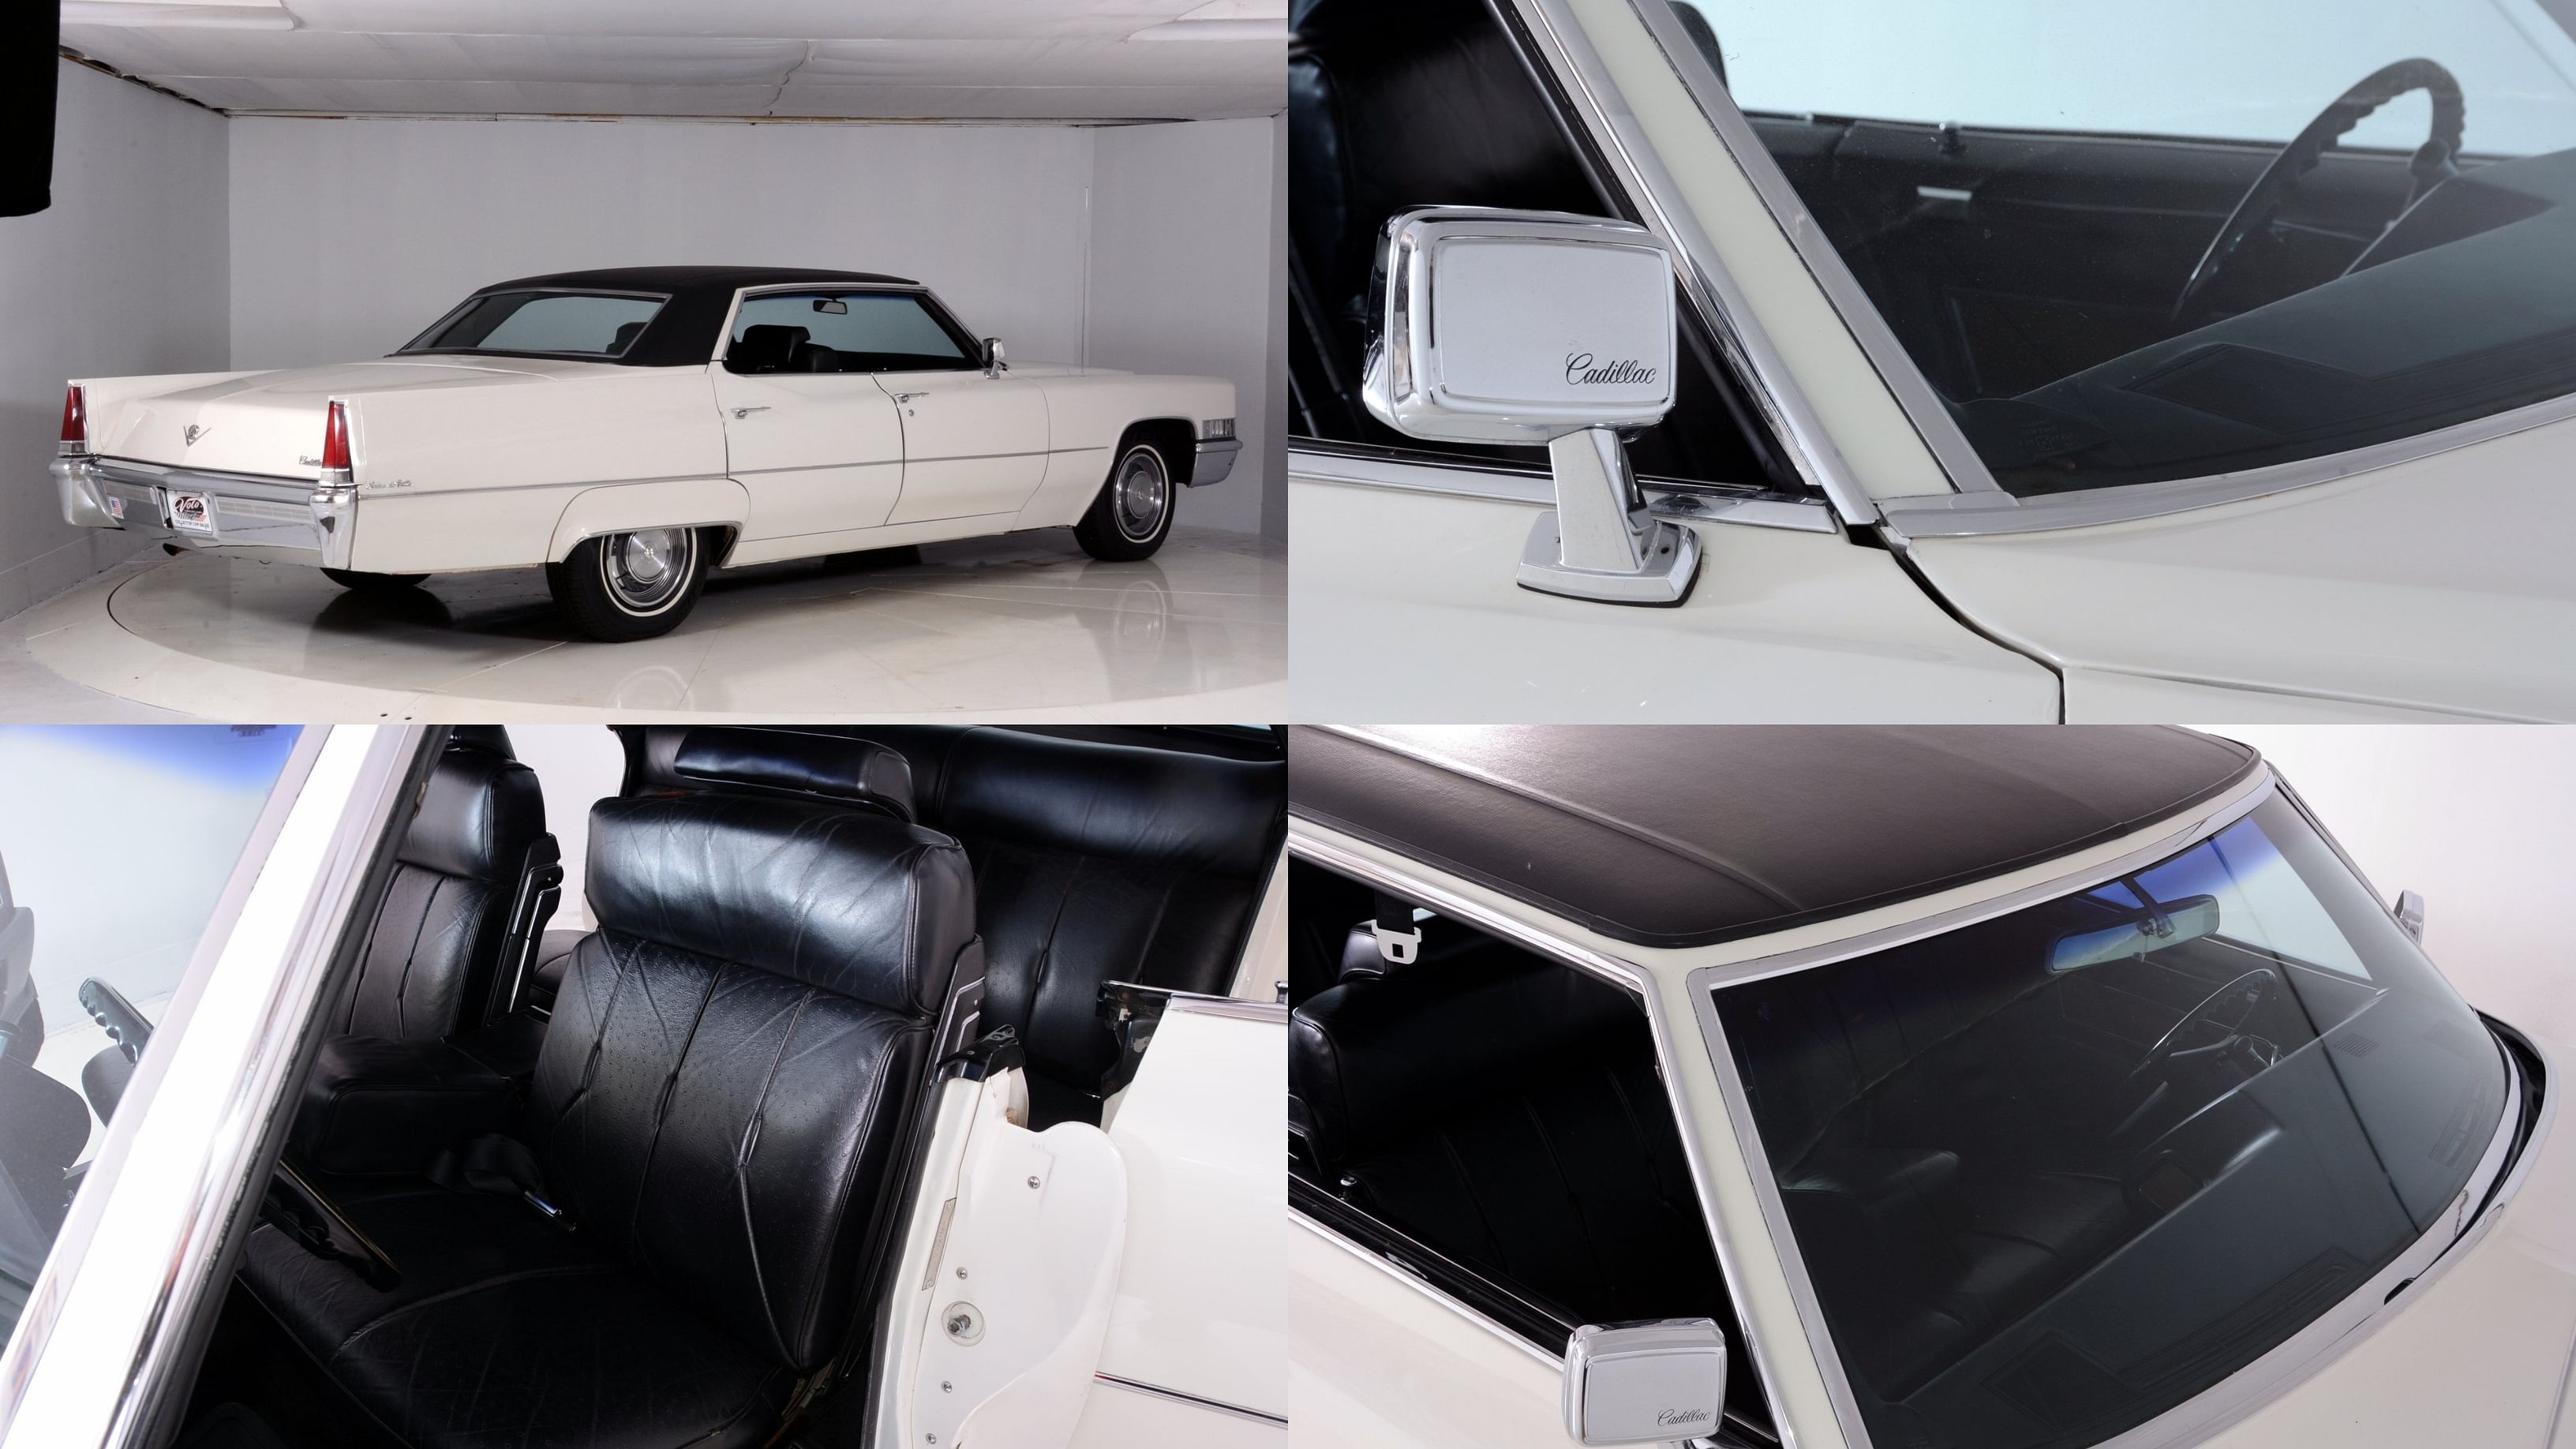 1969 Cadillac Coupe DeVille in white exterior, bodystyle, front seats, roof, side mirror, rear end